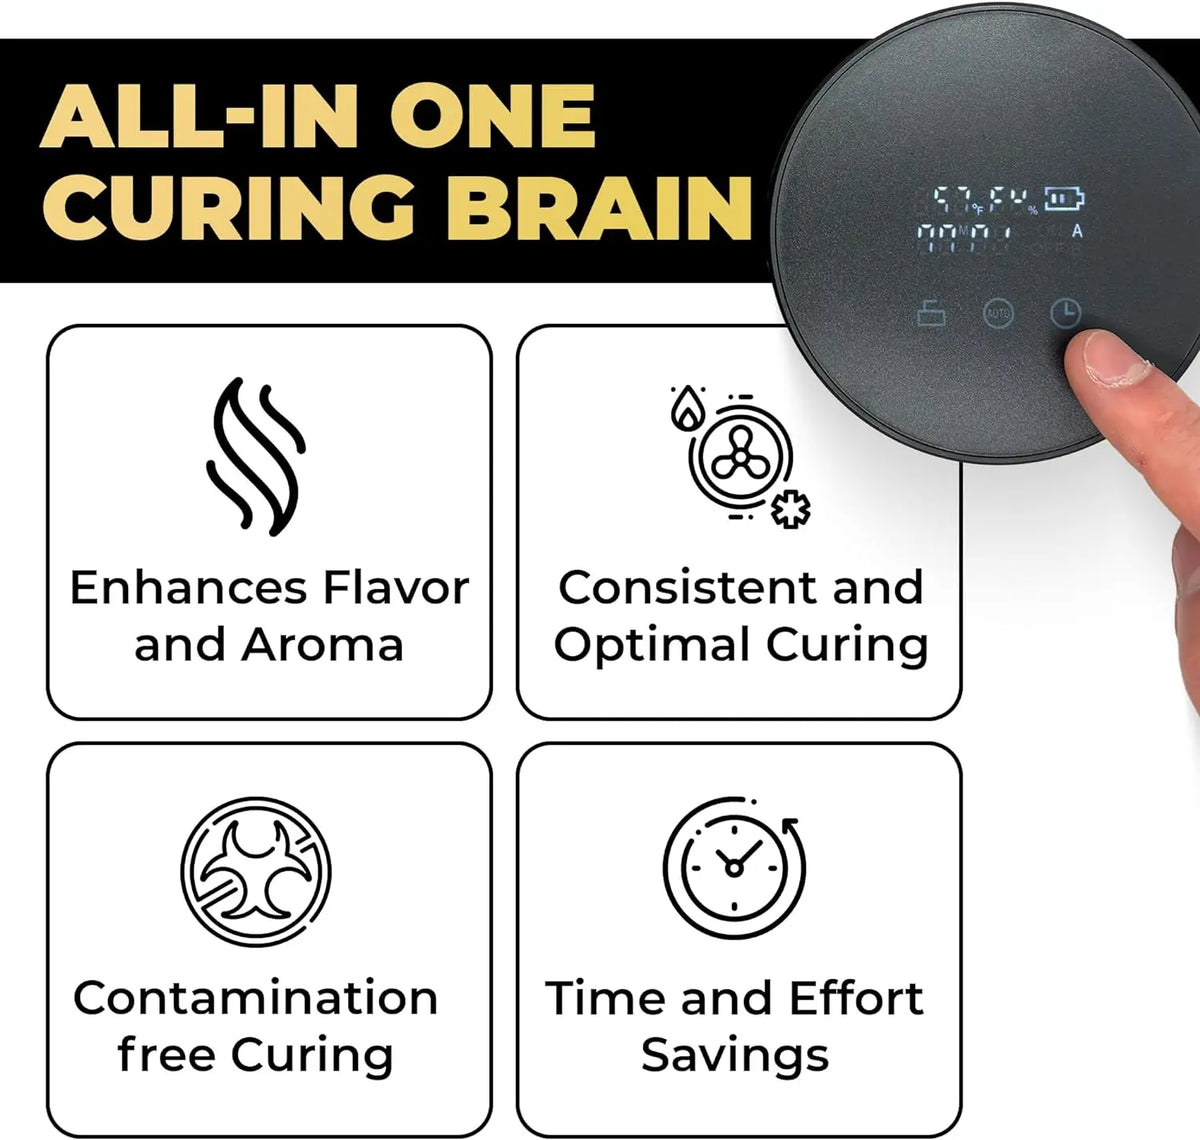 Cure Lids Automated Air Exchange FAE Smart Brain